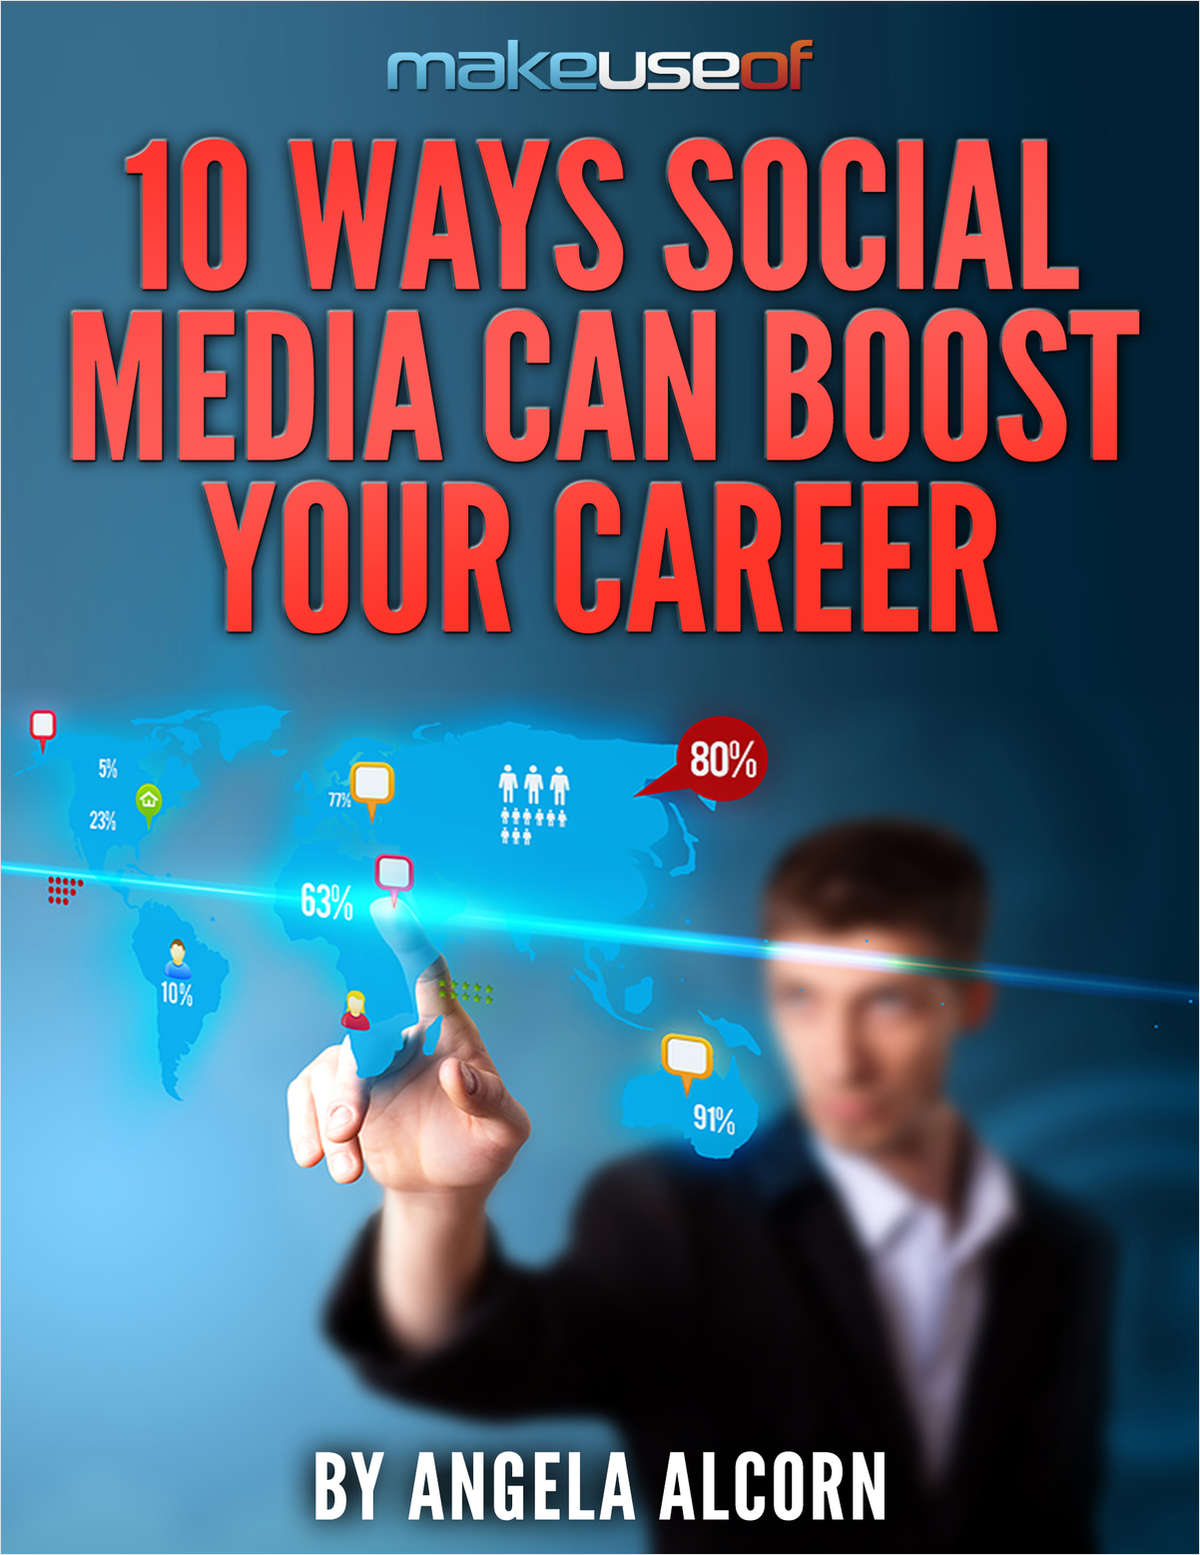 10 Ways Social Media Can Boost Your Career